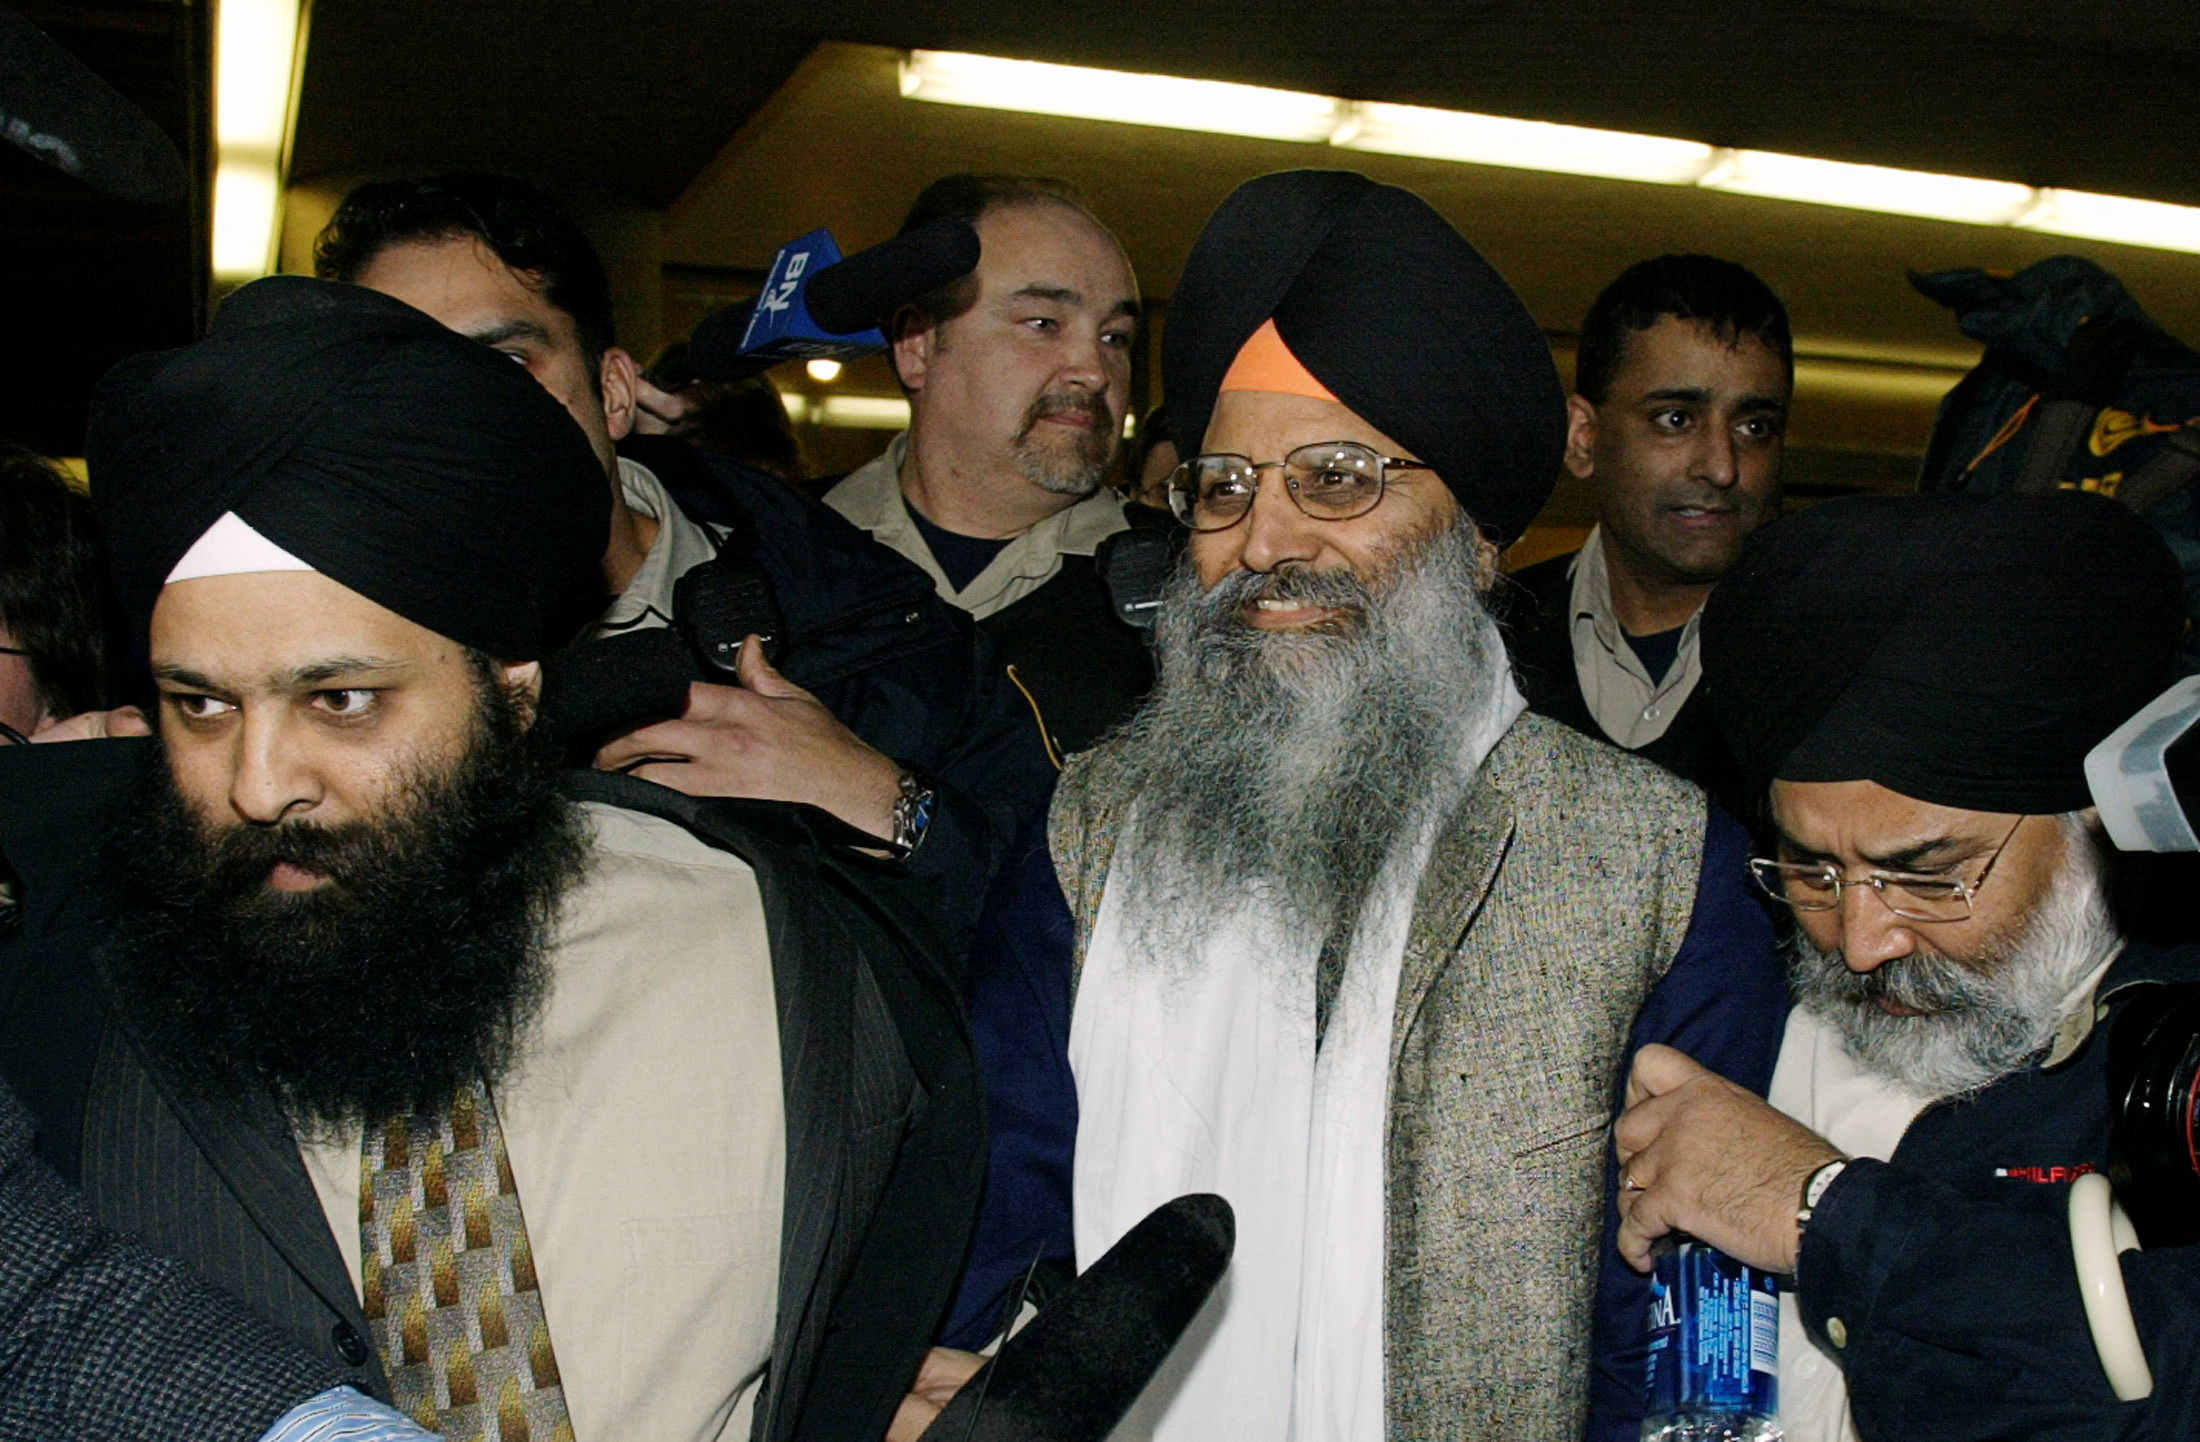 Ripudaman Singh Malik, Acquitted in Deadly 1985 Air India Bombing that Killed 329 People, Killed in Canada